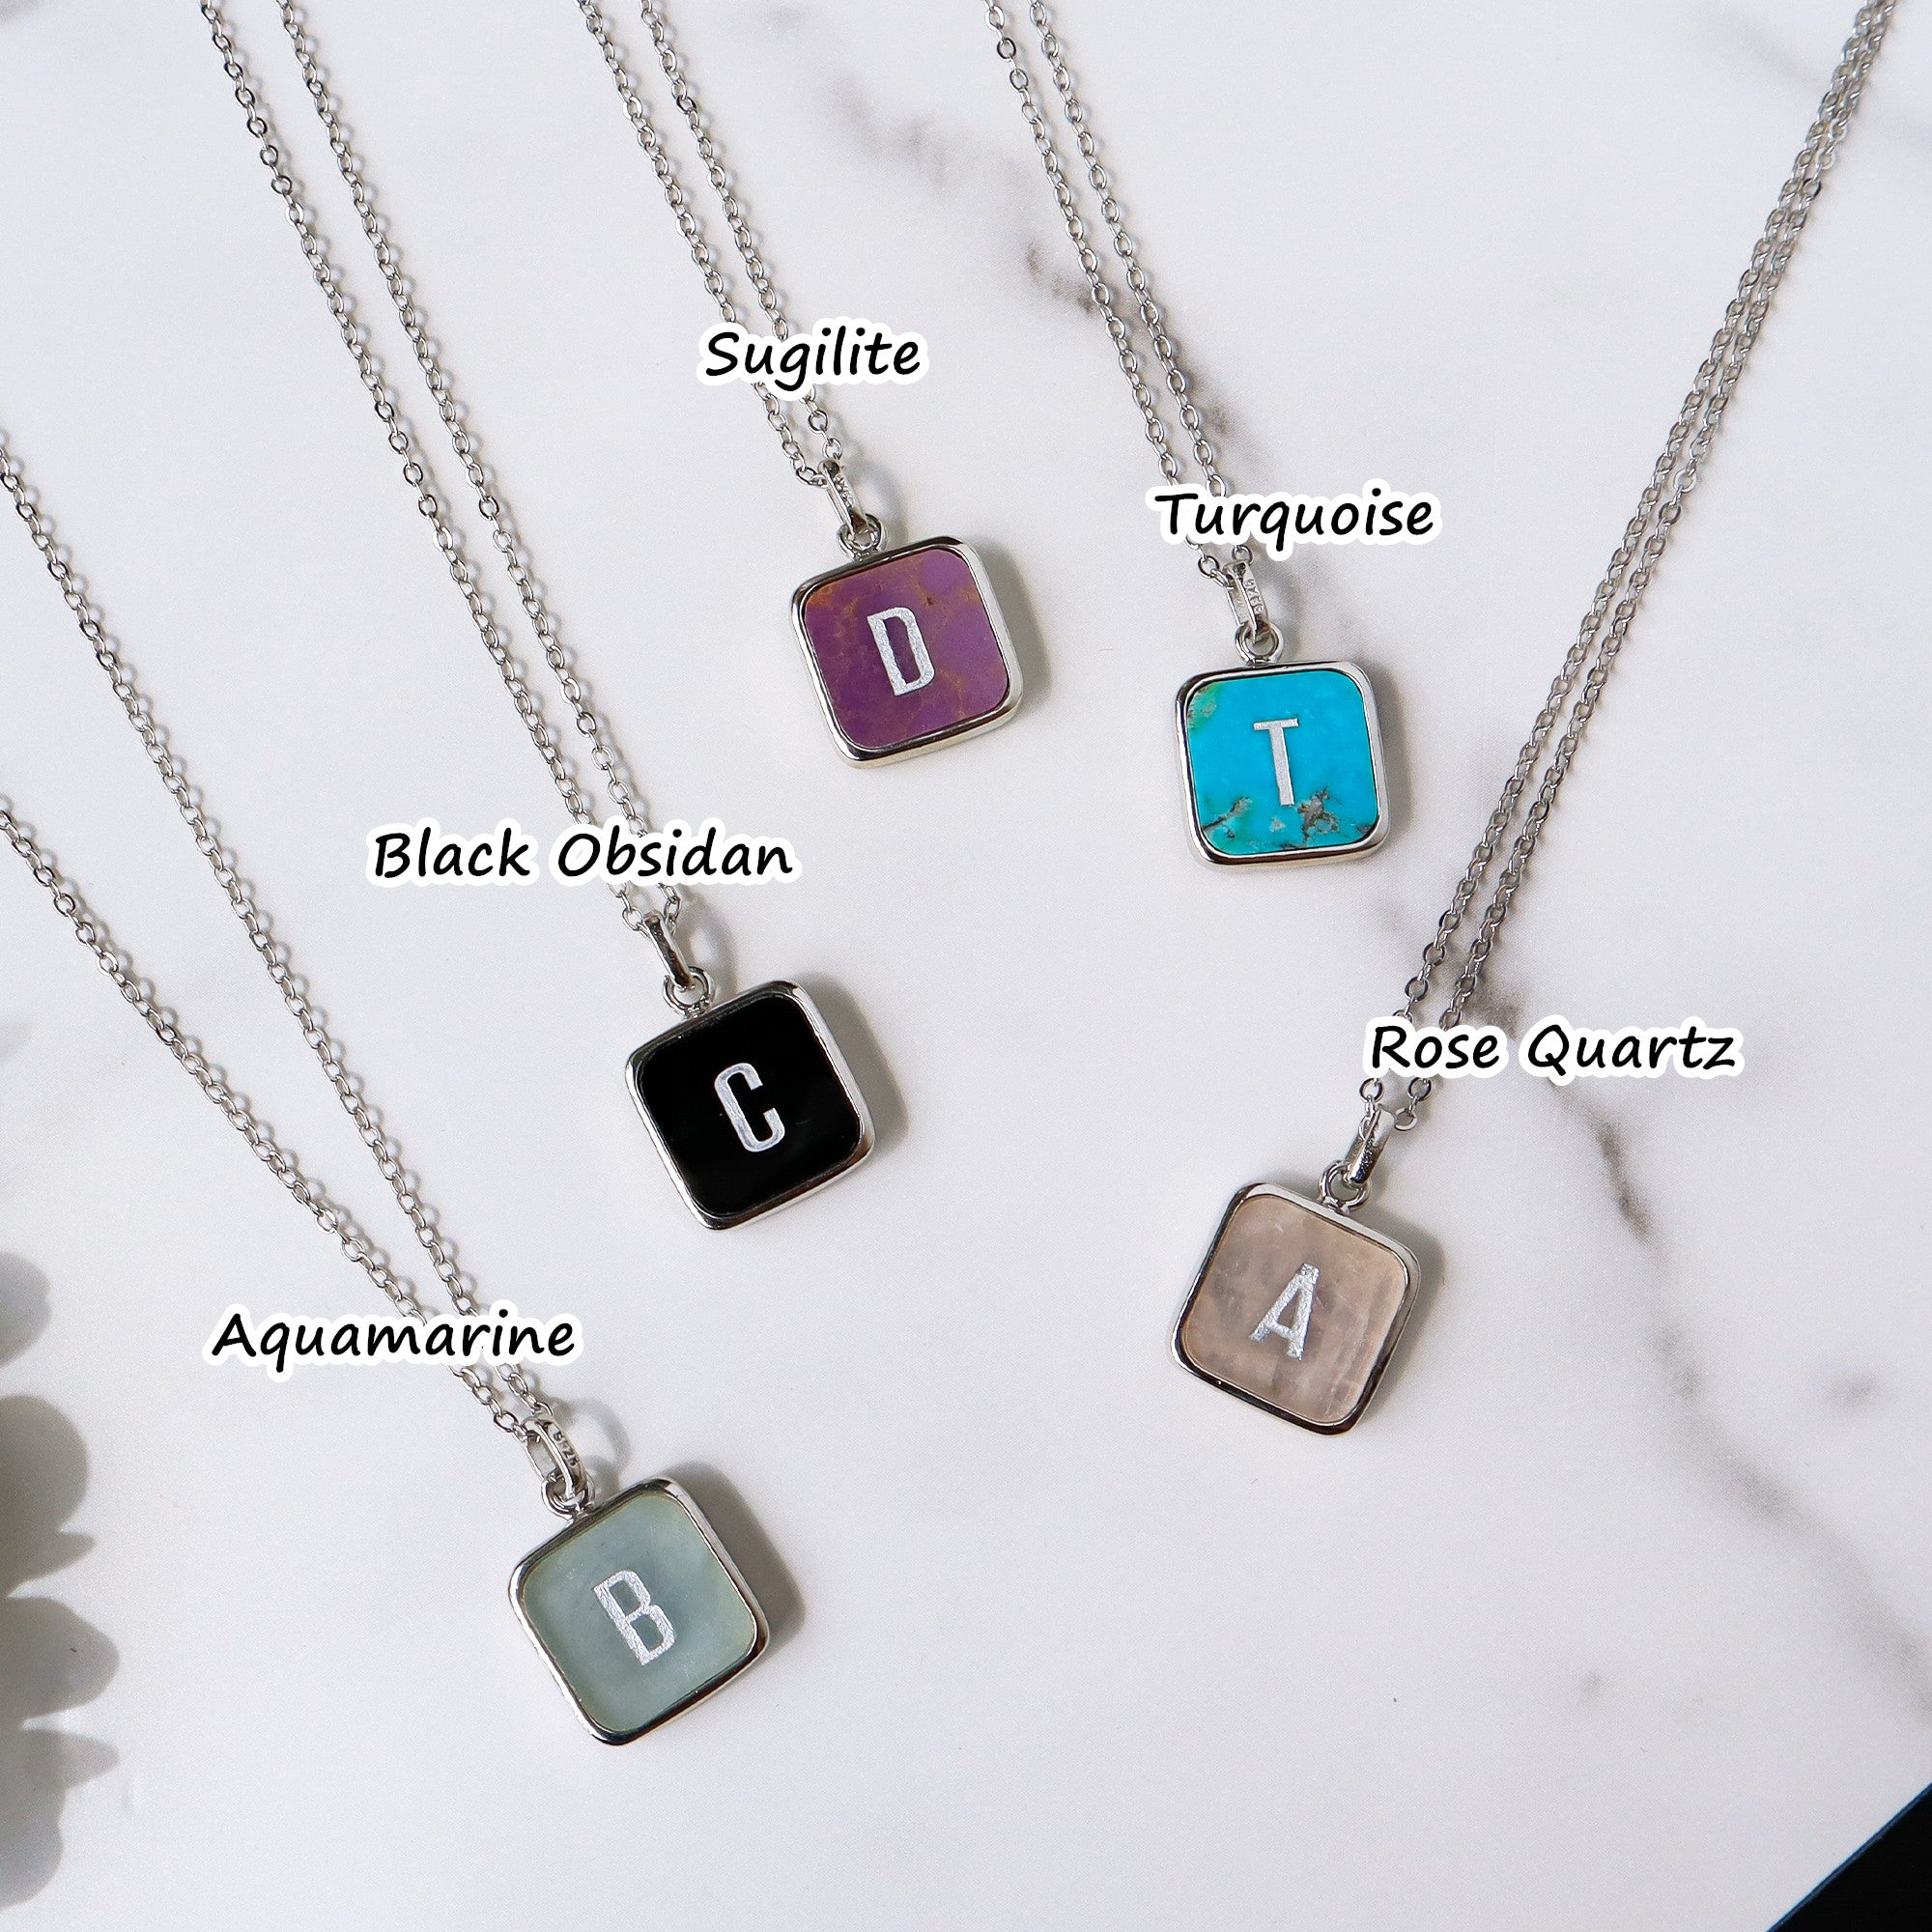 16" Square Silver Plated Rainbow Gemstone Necklace, Letter Necklace, Healing Crystal Stone Jewelry, You Choose The Letters KZ032